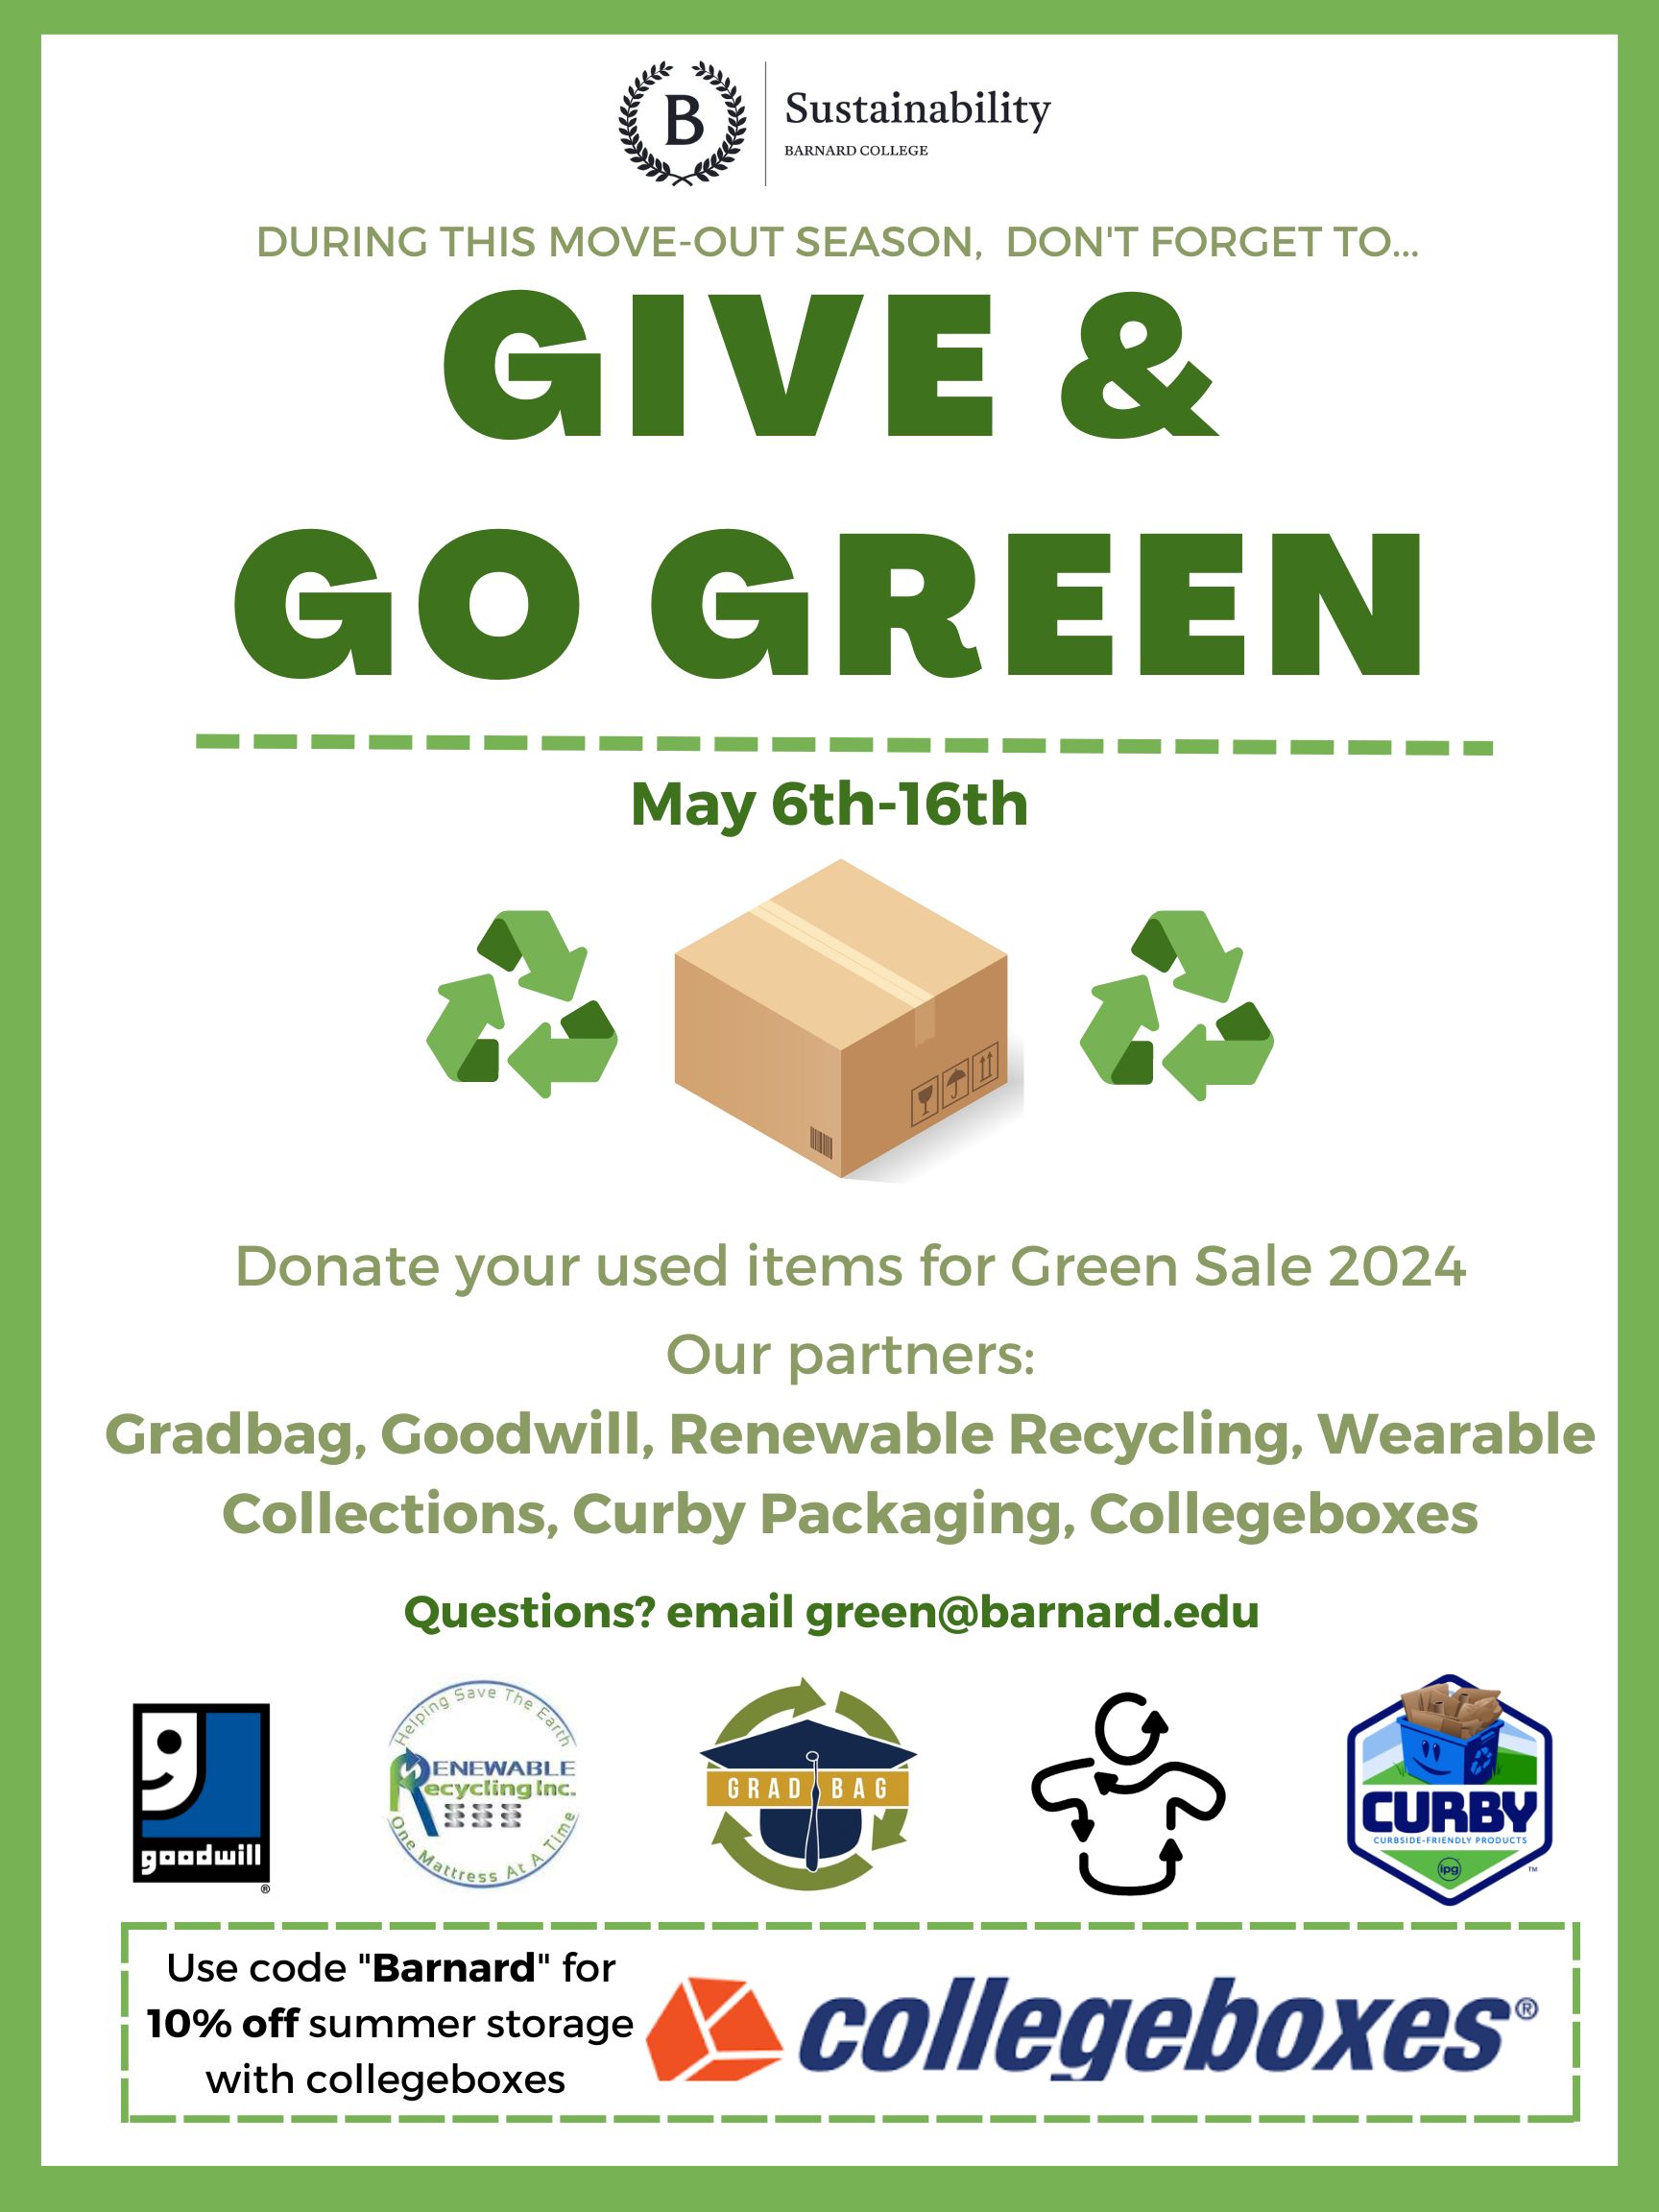 A flyer promoting the give and go green initiative accepting donations from May 6-16